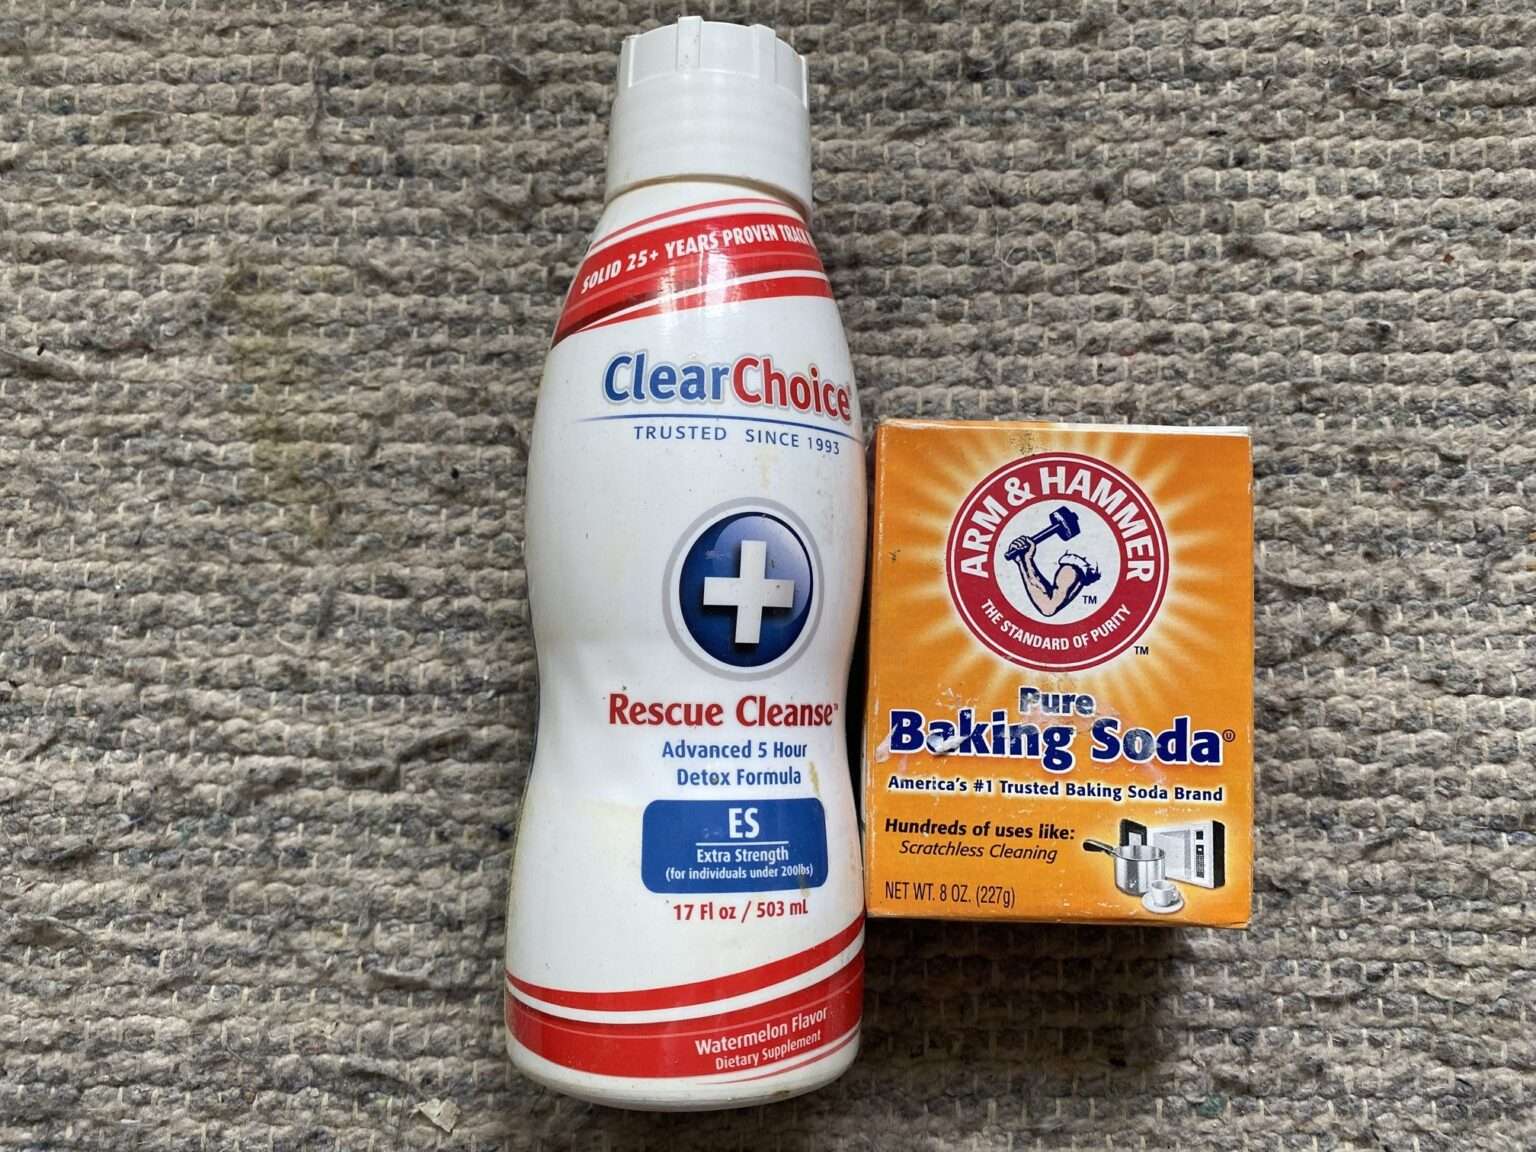 Can You Really Use Baking Soda To Pass A Drug Test?